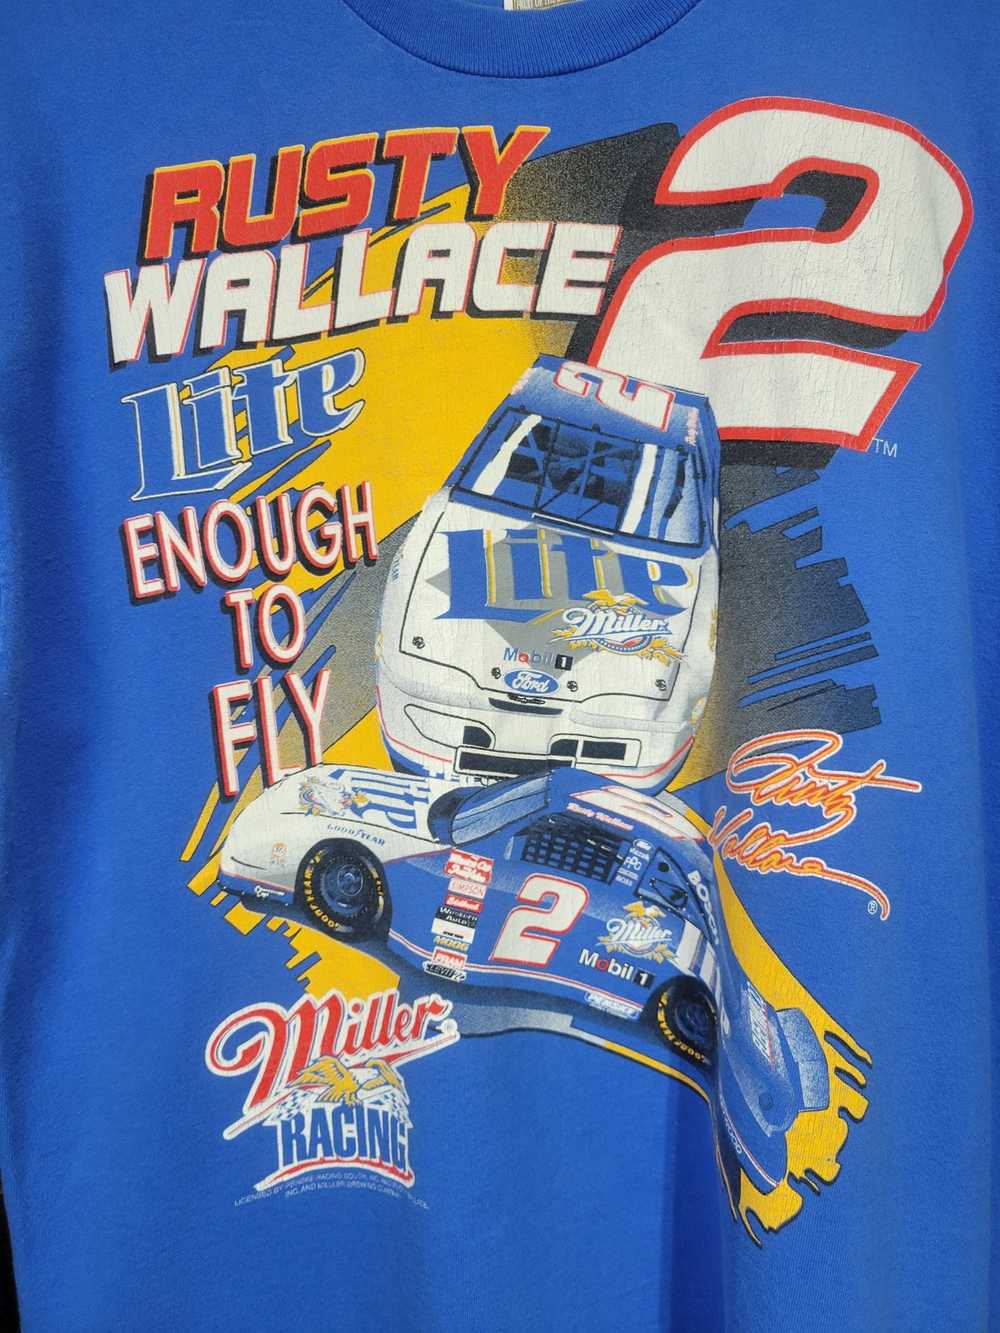 NASCAR 90s Rusty Wallace " Lite Enough To Fly" - image 8